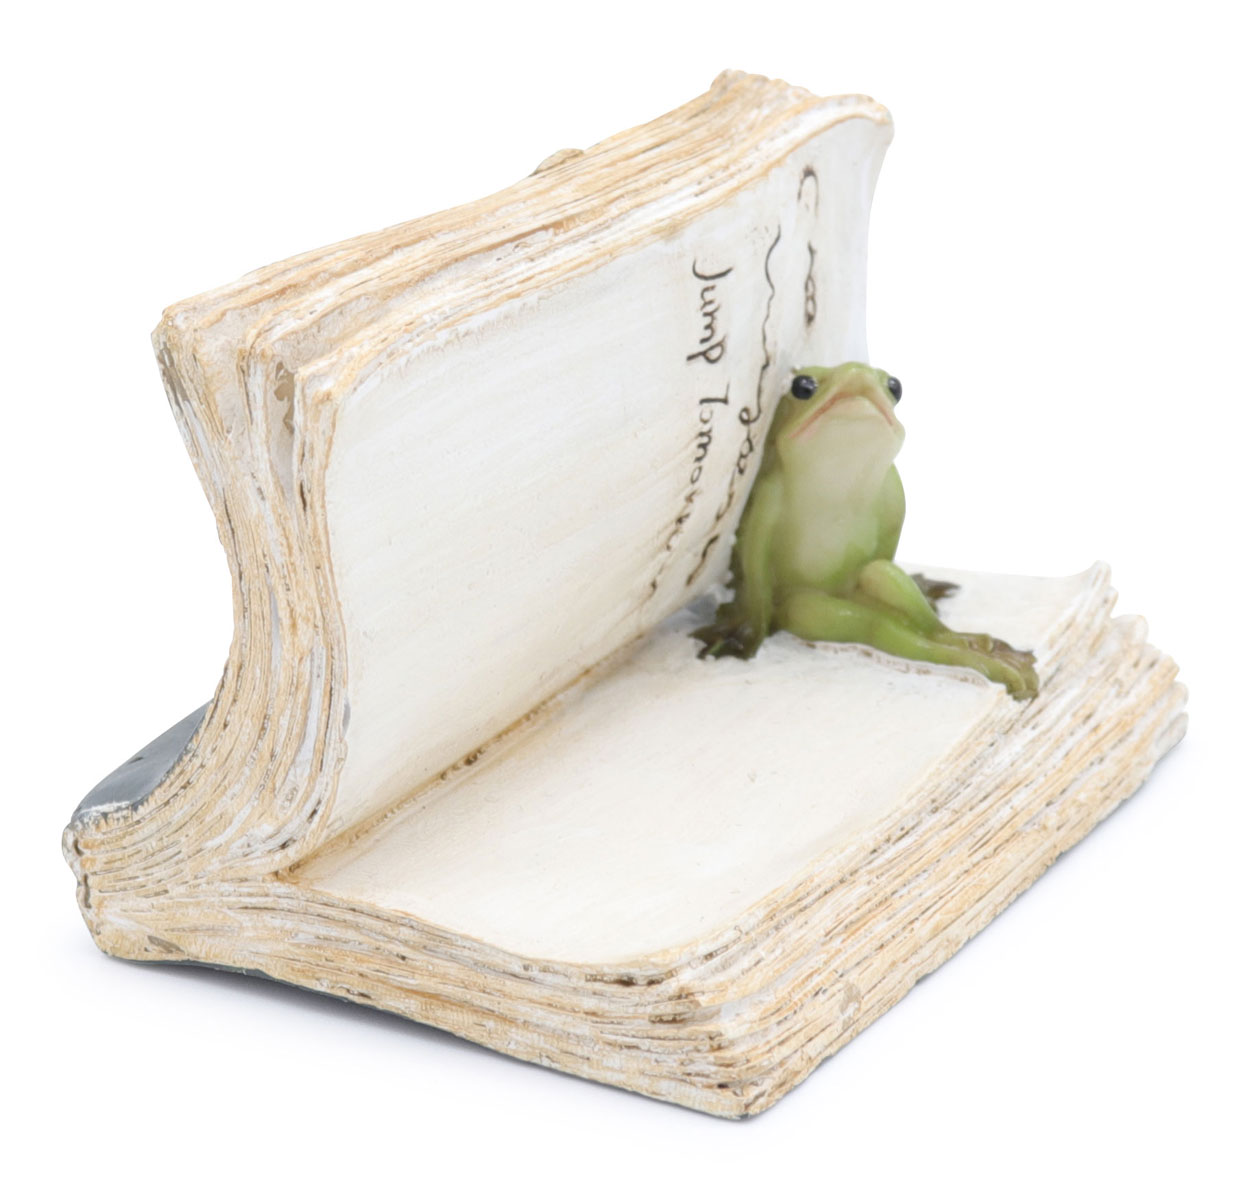 Book with frog Erwin, 